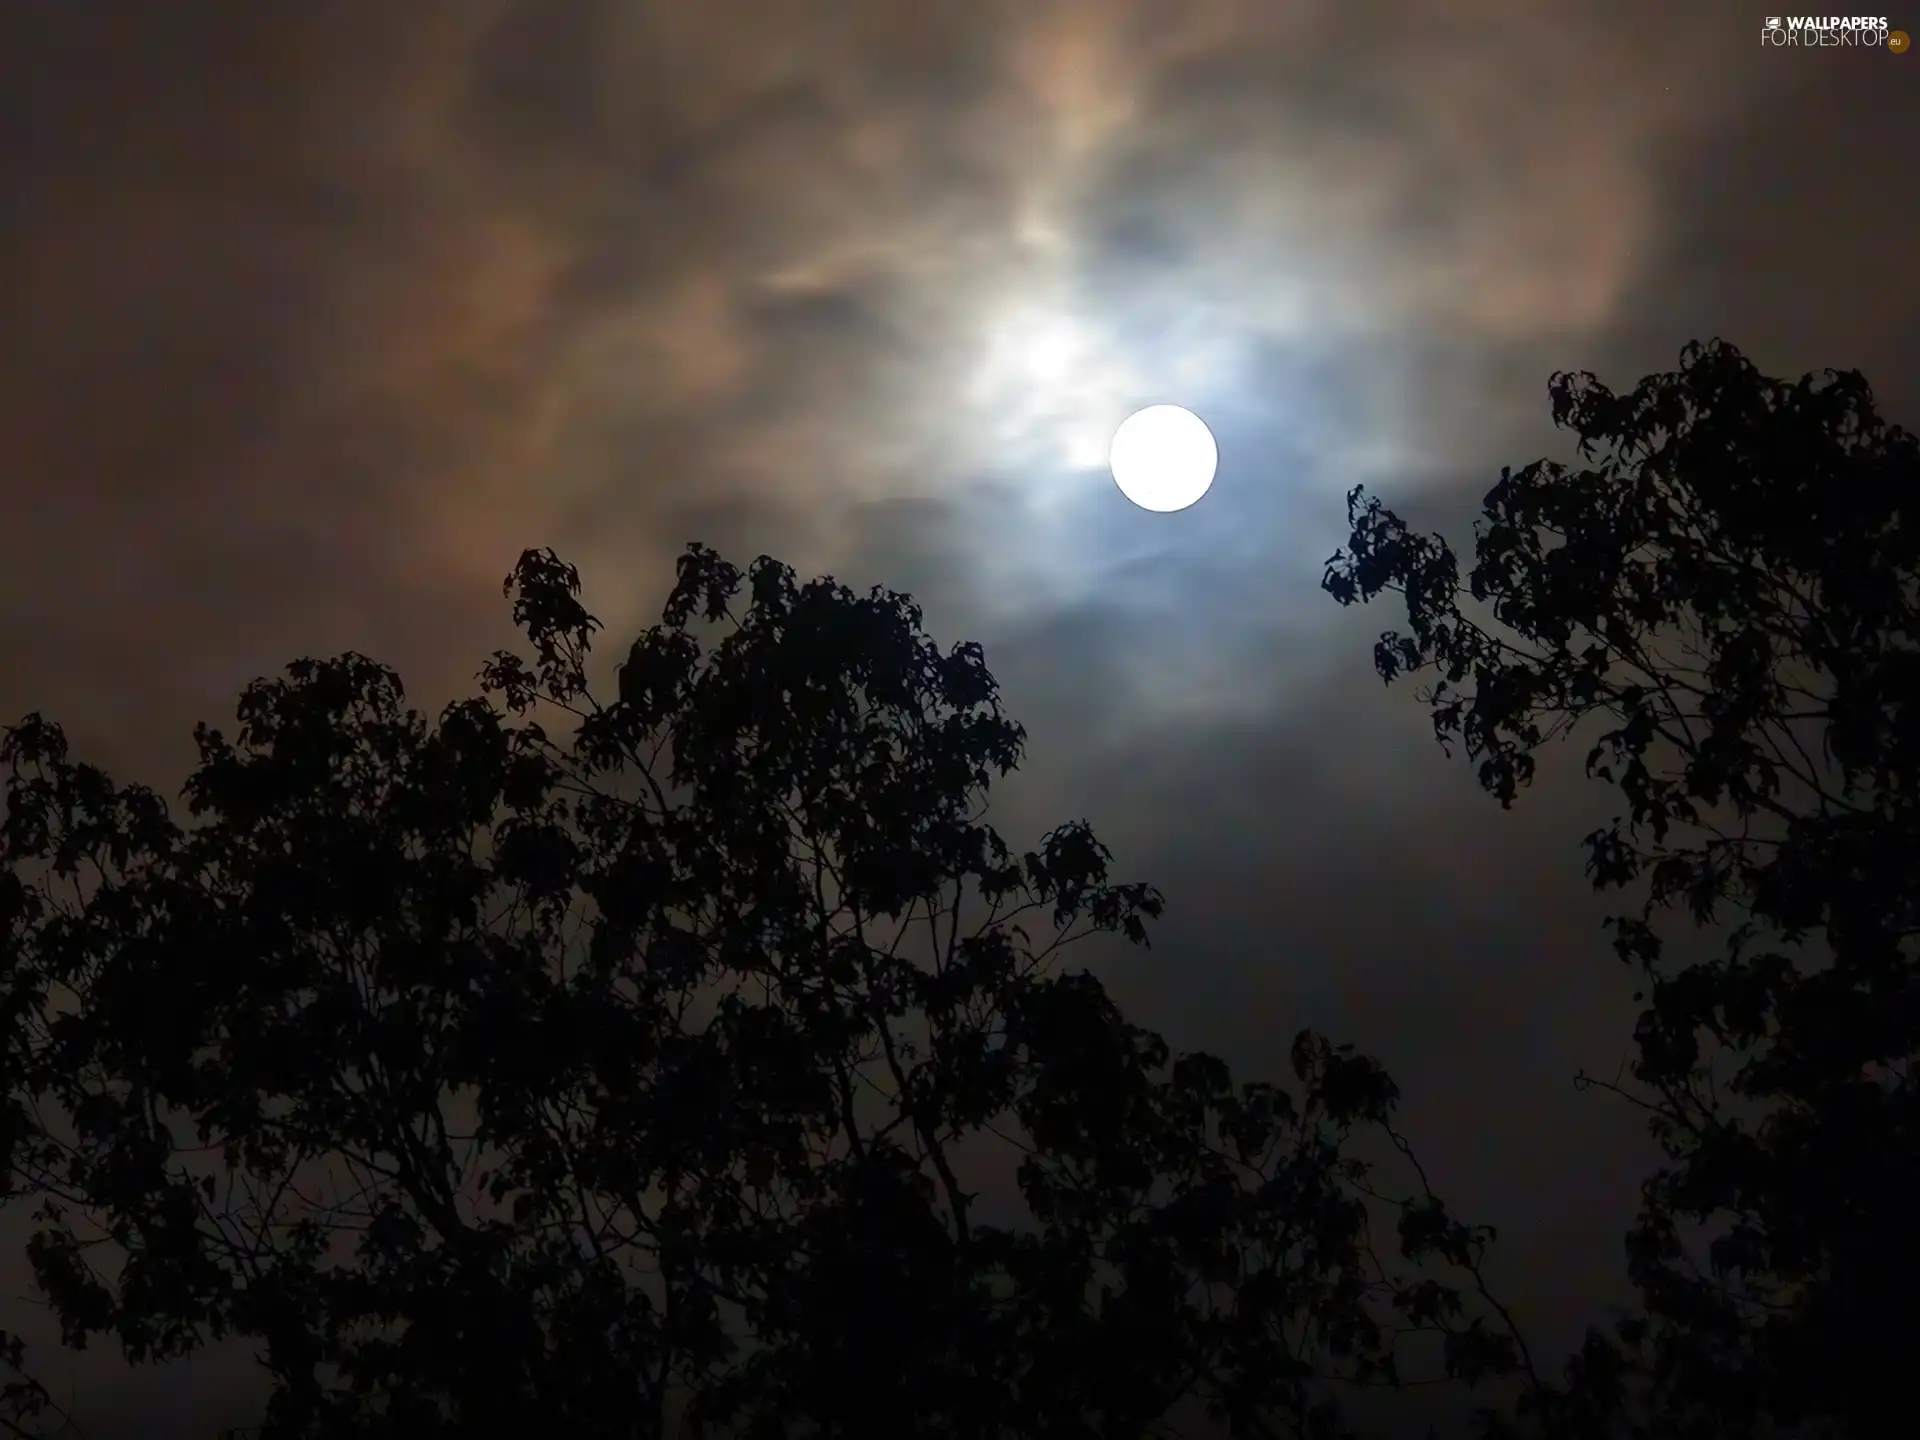 Night, trees, viewes, moon